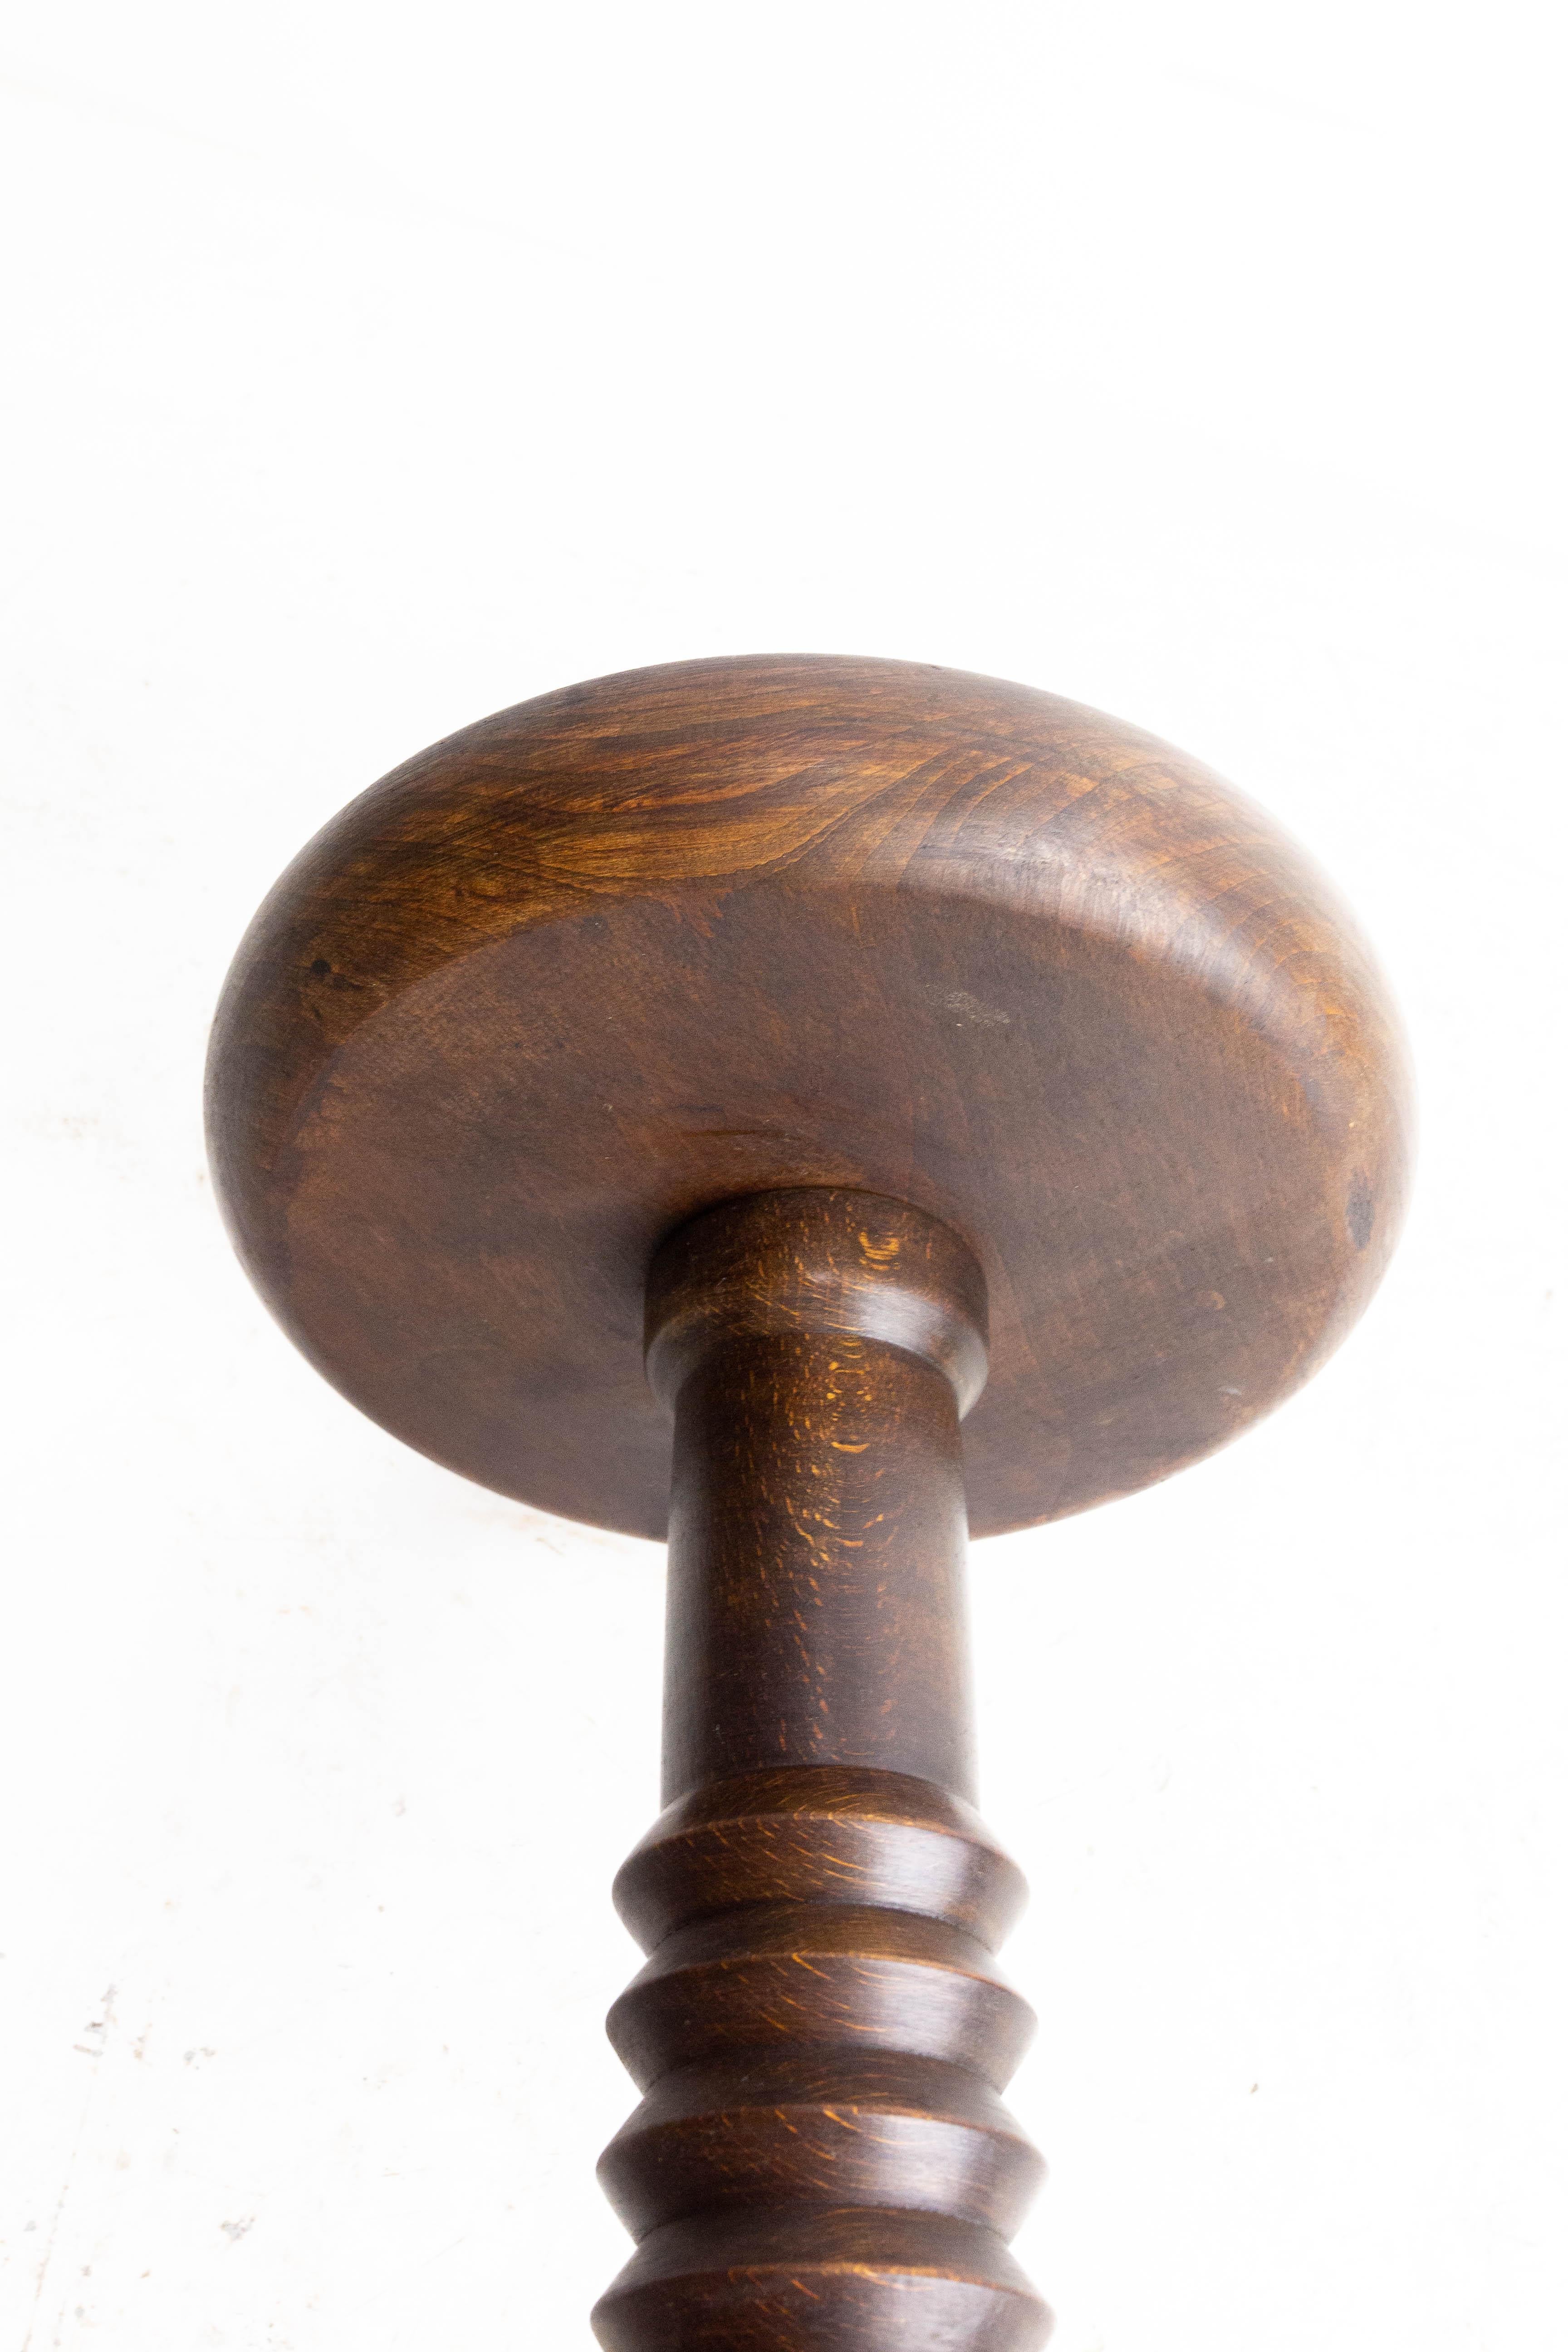 20th Century French Mid-Century Pedestal or Plant Holder Walnut Dudouyt Style, circa 1960